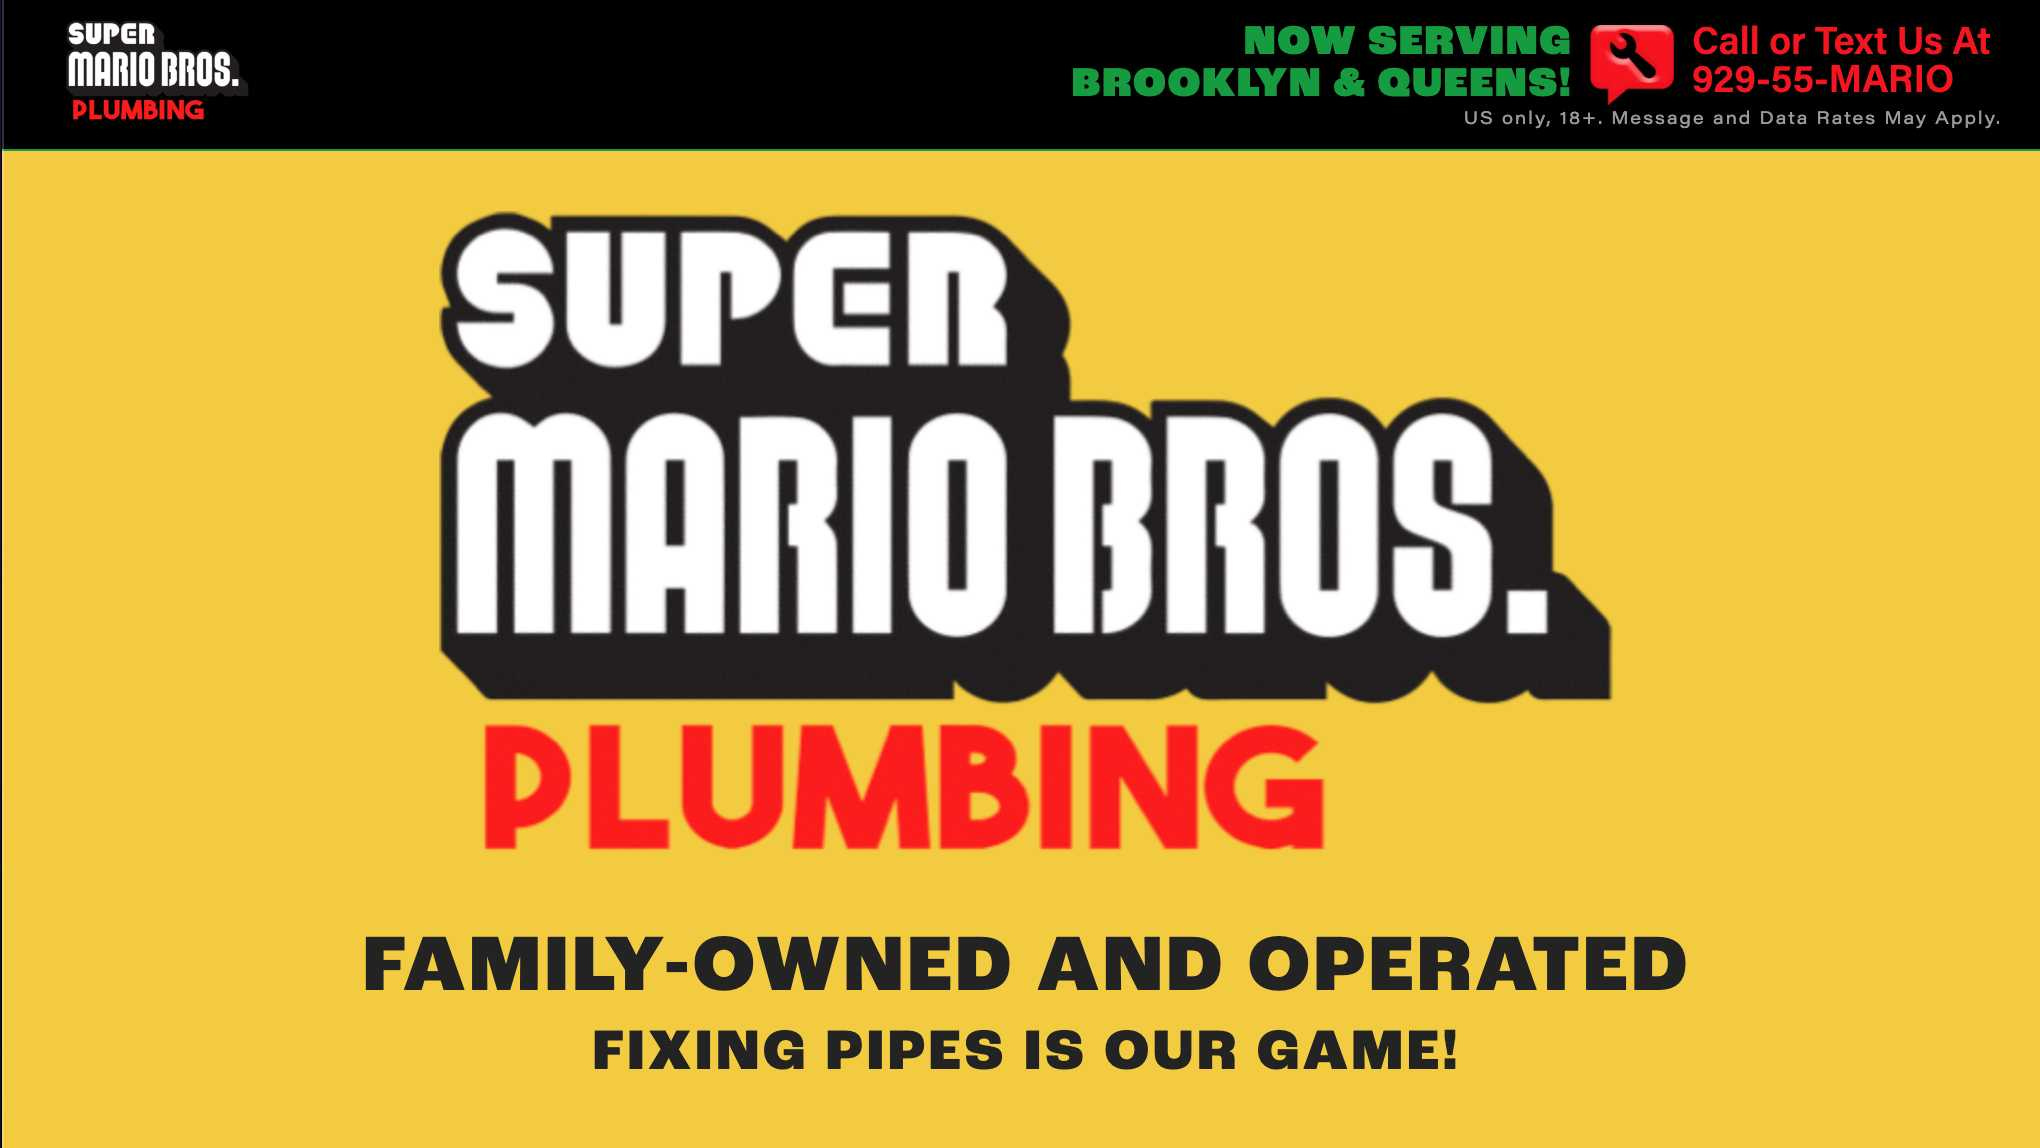 The Super Mario Bros Plumbing website is hilarious you can call